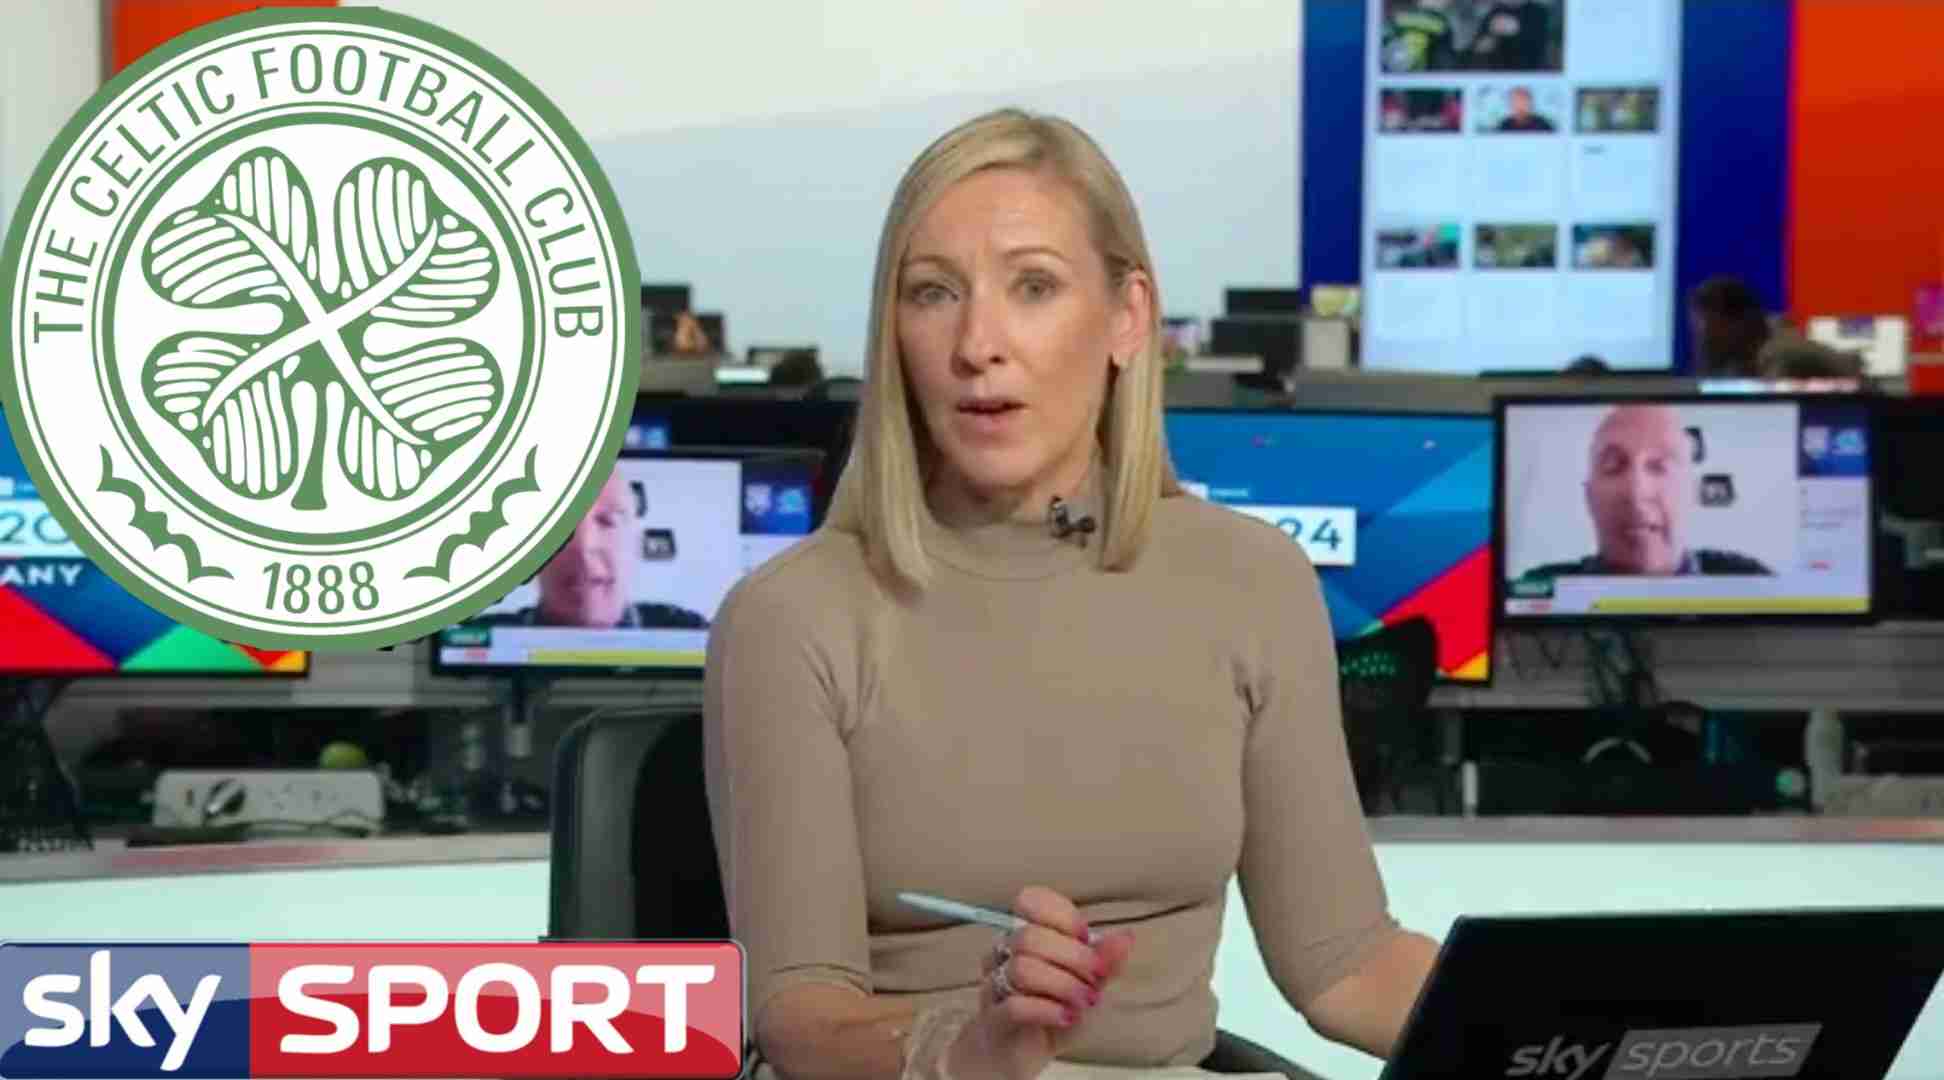 ‘Done Deal, He will move to European club on July 1st’ – Celtic target agrees 3-year deal, deal with be made official next week after reaching Personal Terms